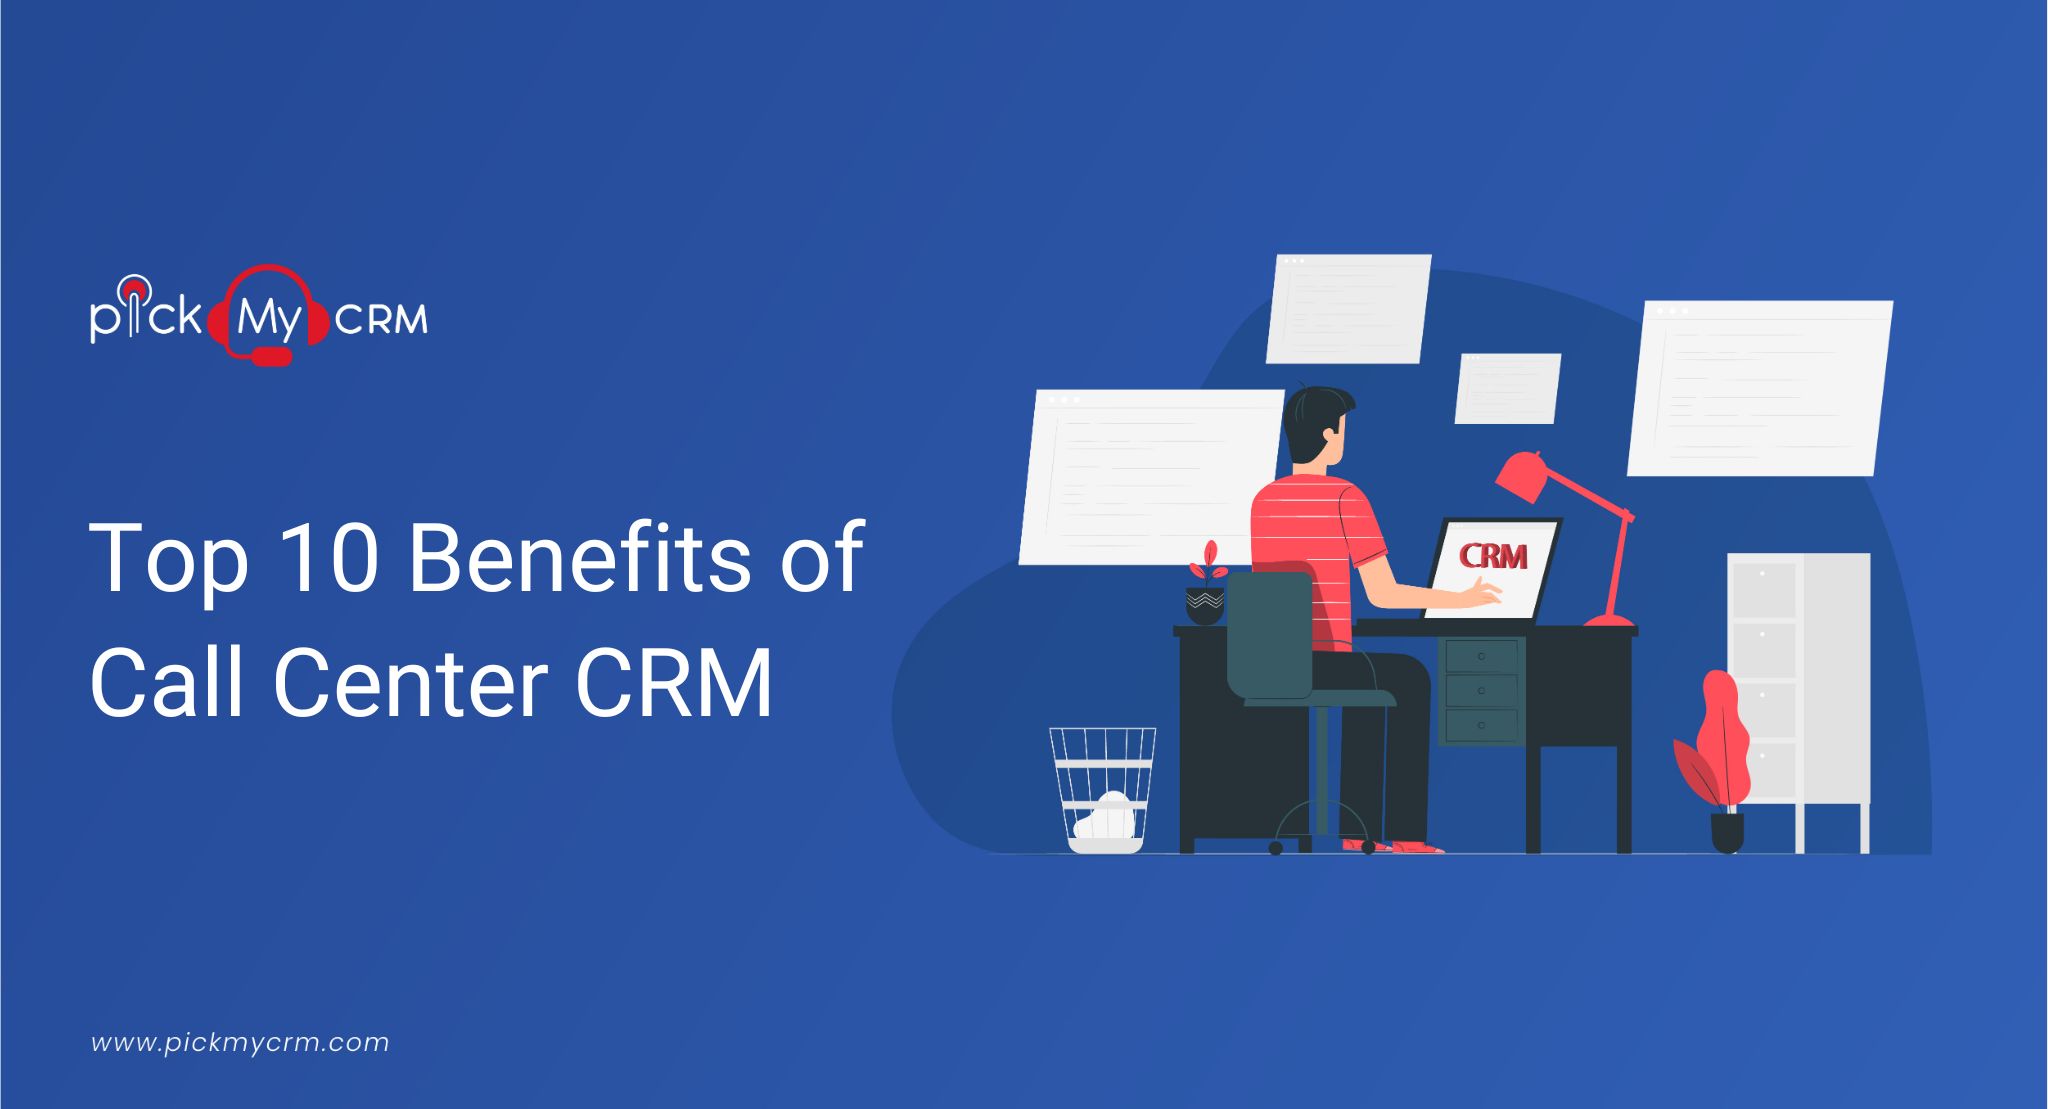 Top 10 Benefits of Call Center CRM